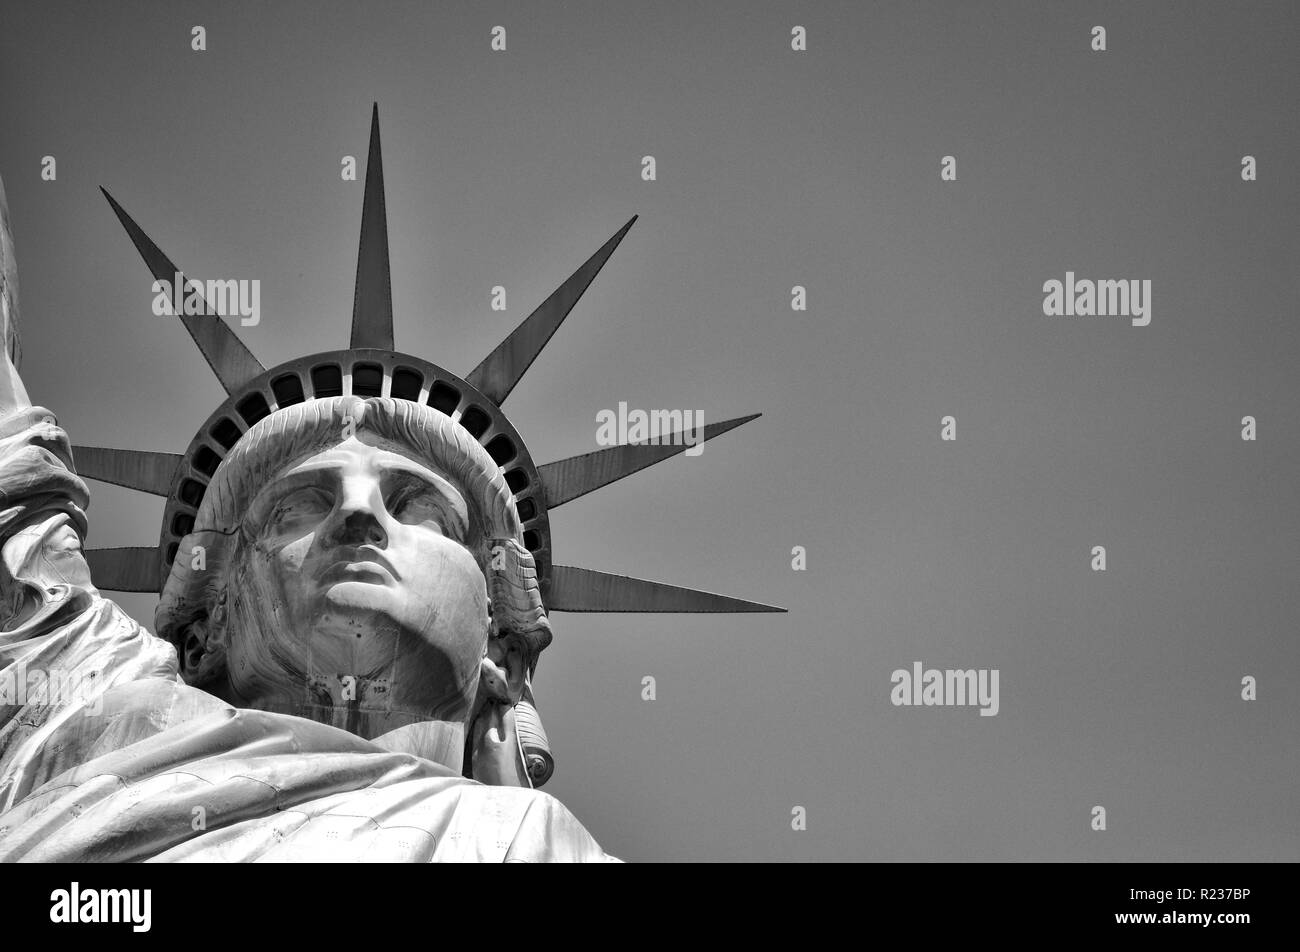 Statue of Liberty in New York, USA. Stock Photo